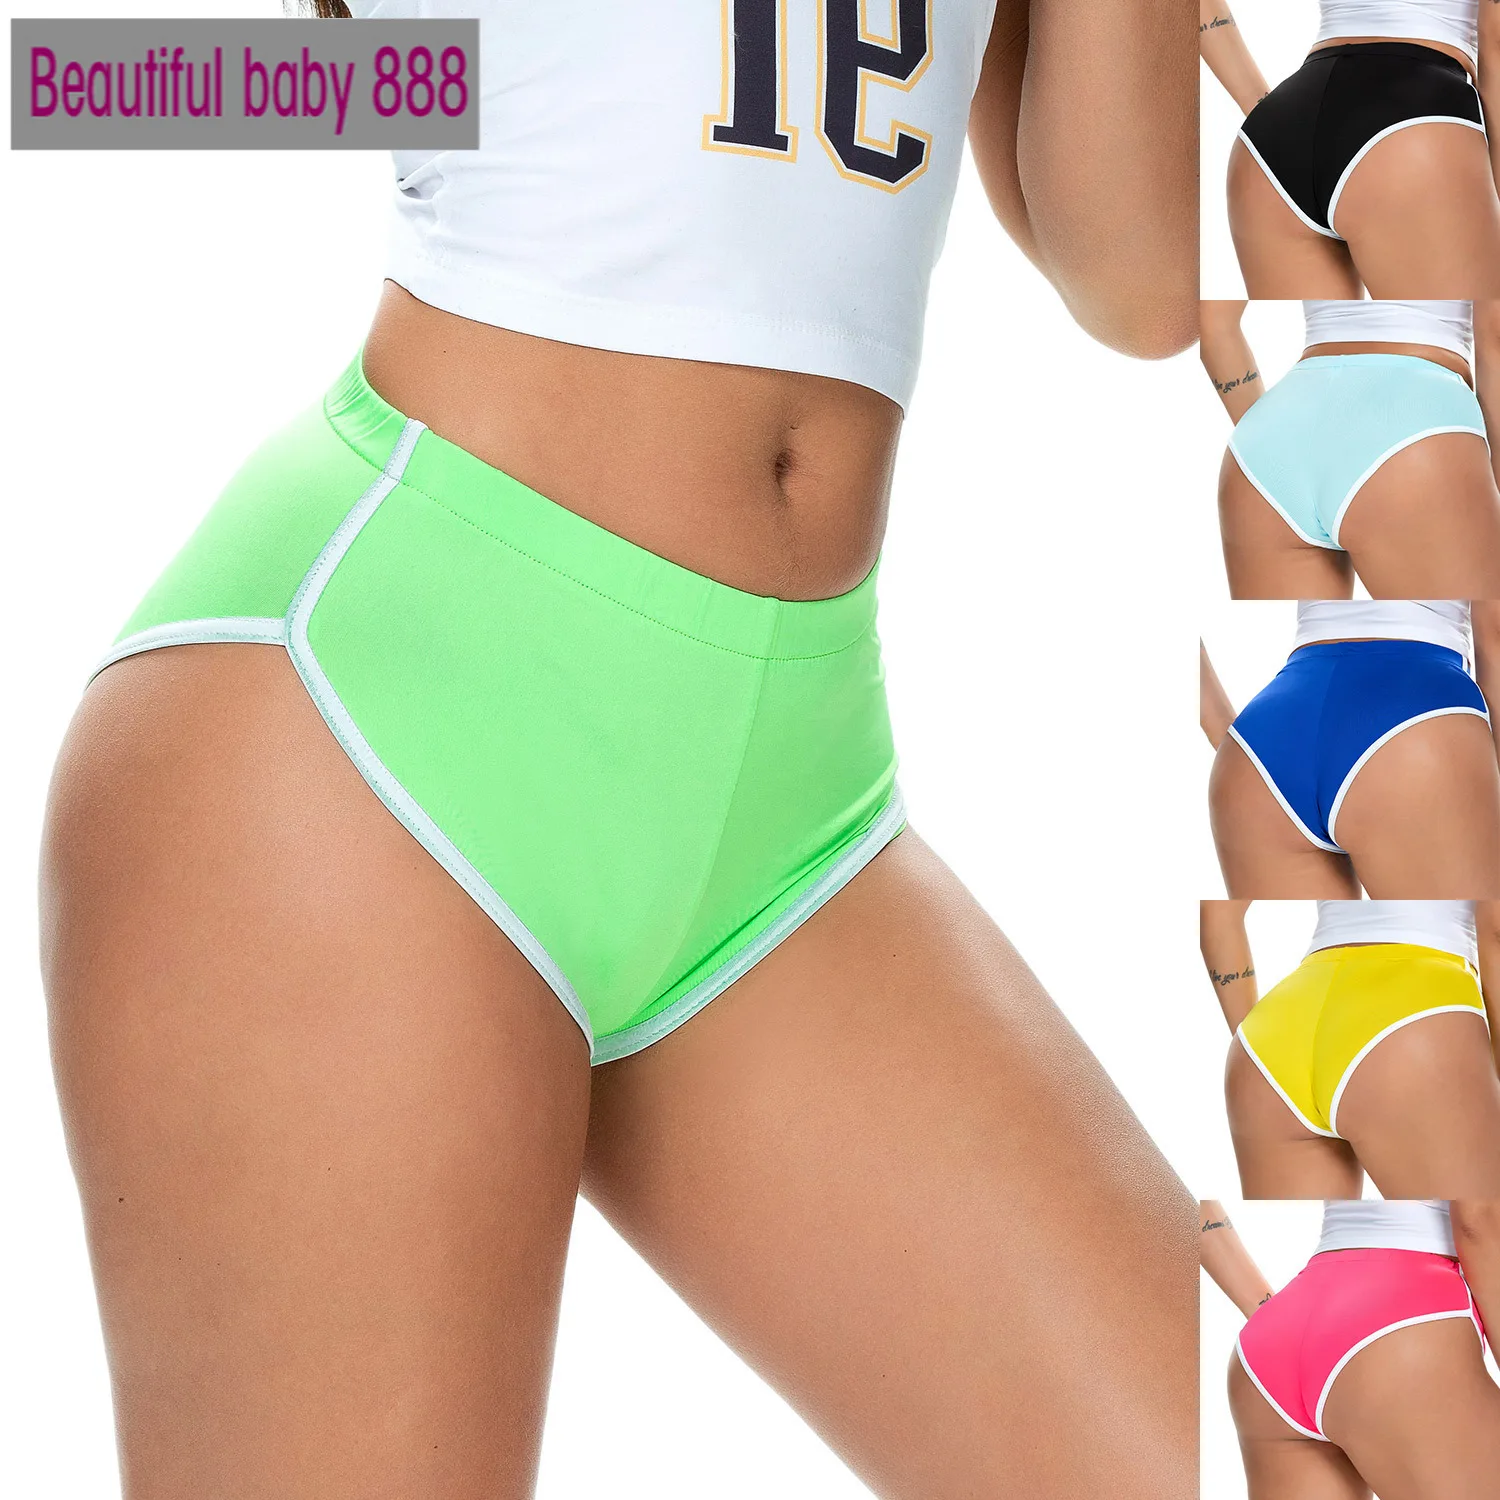 Meqeiss 2021 New summer ladies shorts hot shorts European and American women's sexy running stretch sports shorts